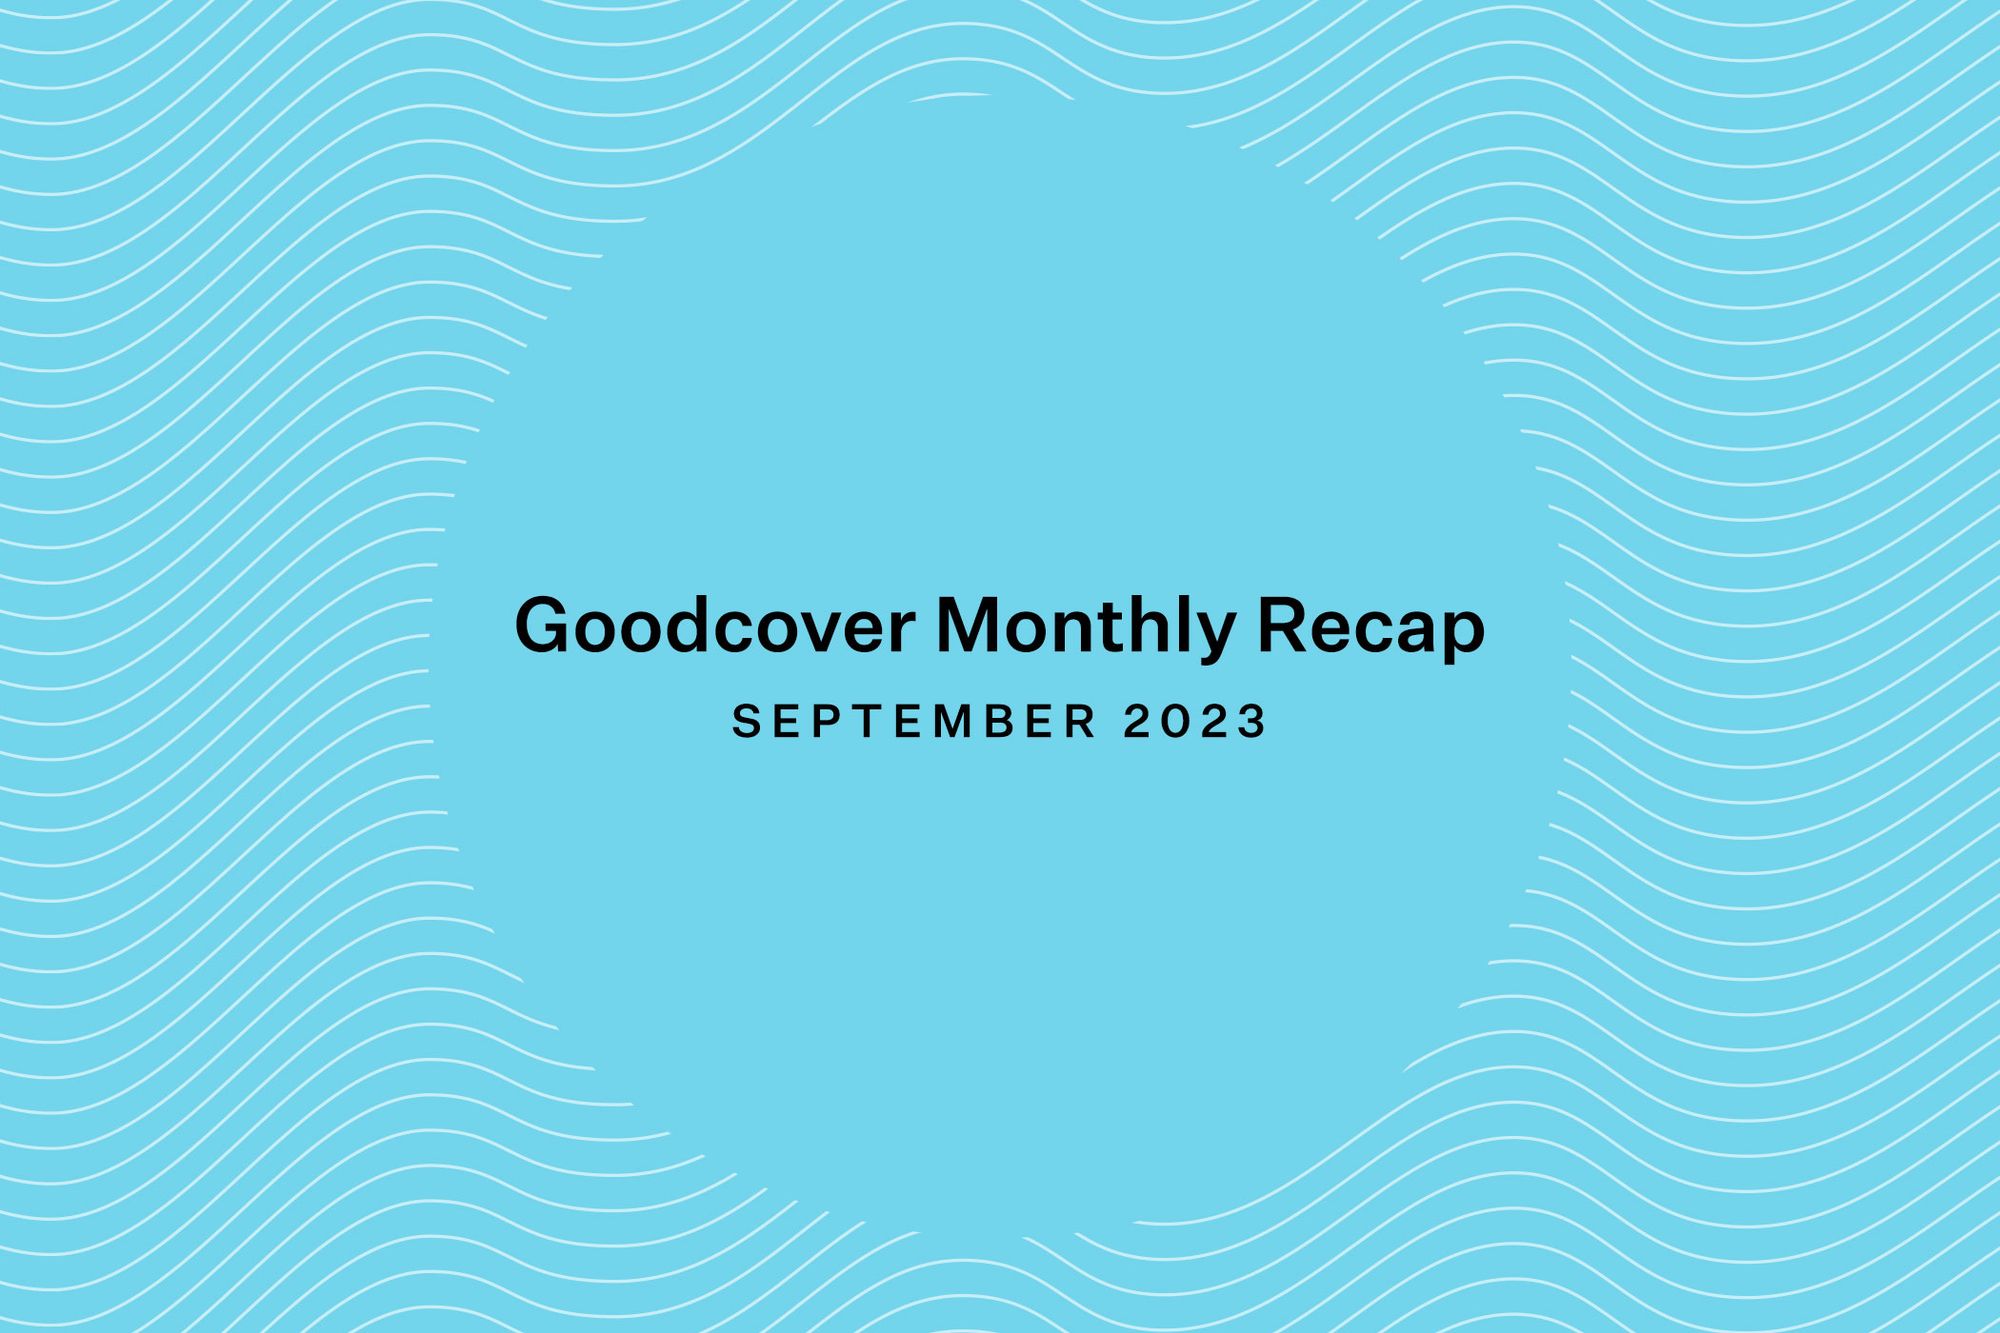 Goodcover Monthly News Roundup | September 2023